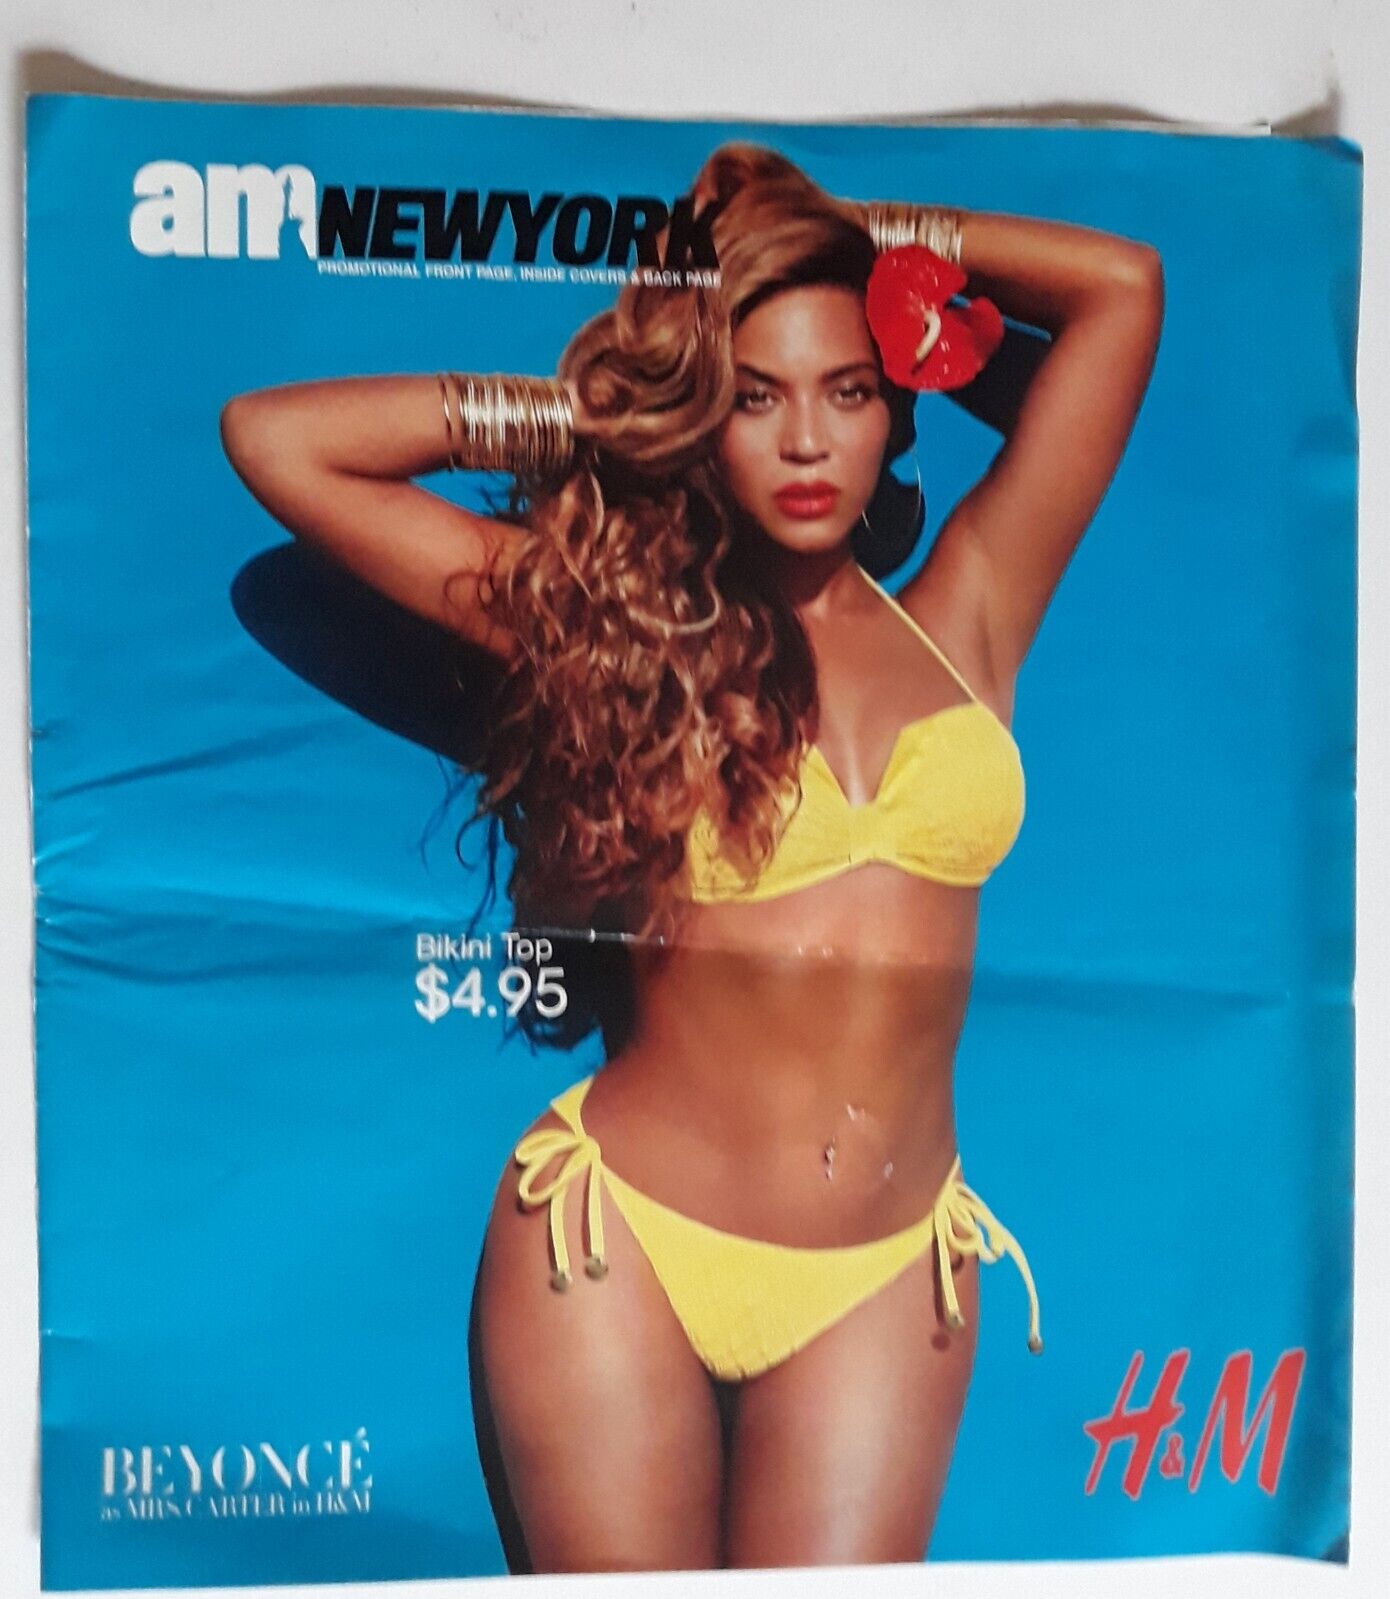 beyonce h&m 2013 am newyork ad campaign Full Color wrap 4 pix spread 12\